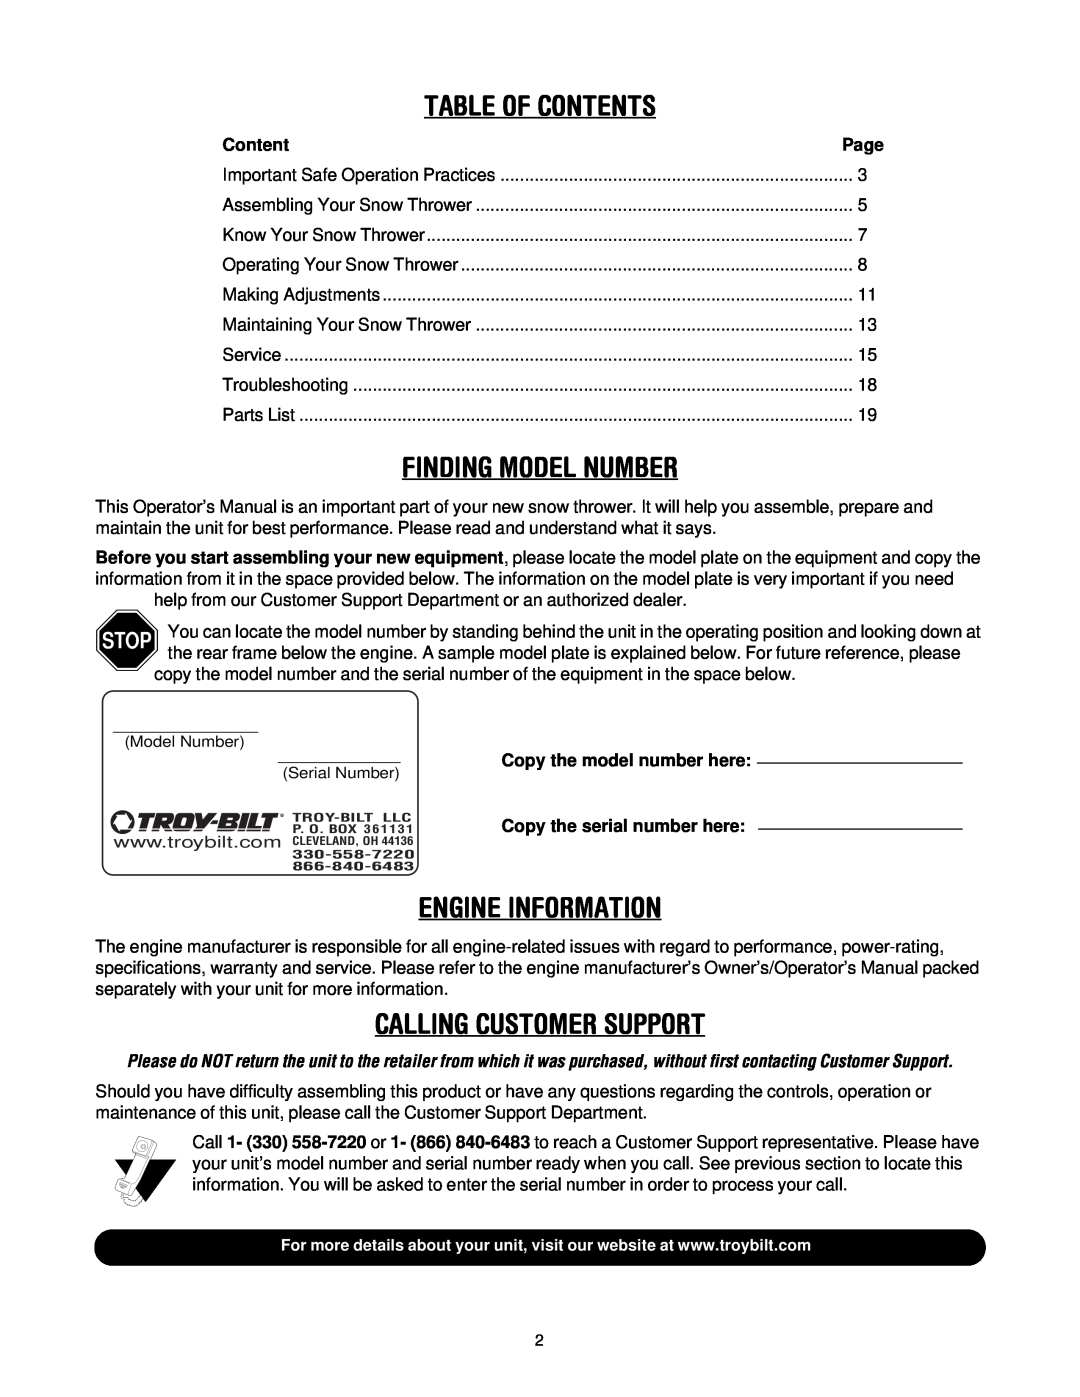 Troy-Bilt 13045 manual Table Of Contents, Finding Model Number, Engine Information, Calling Customer Support 